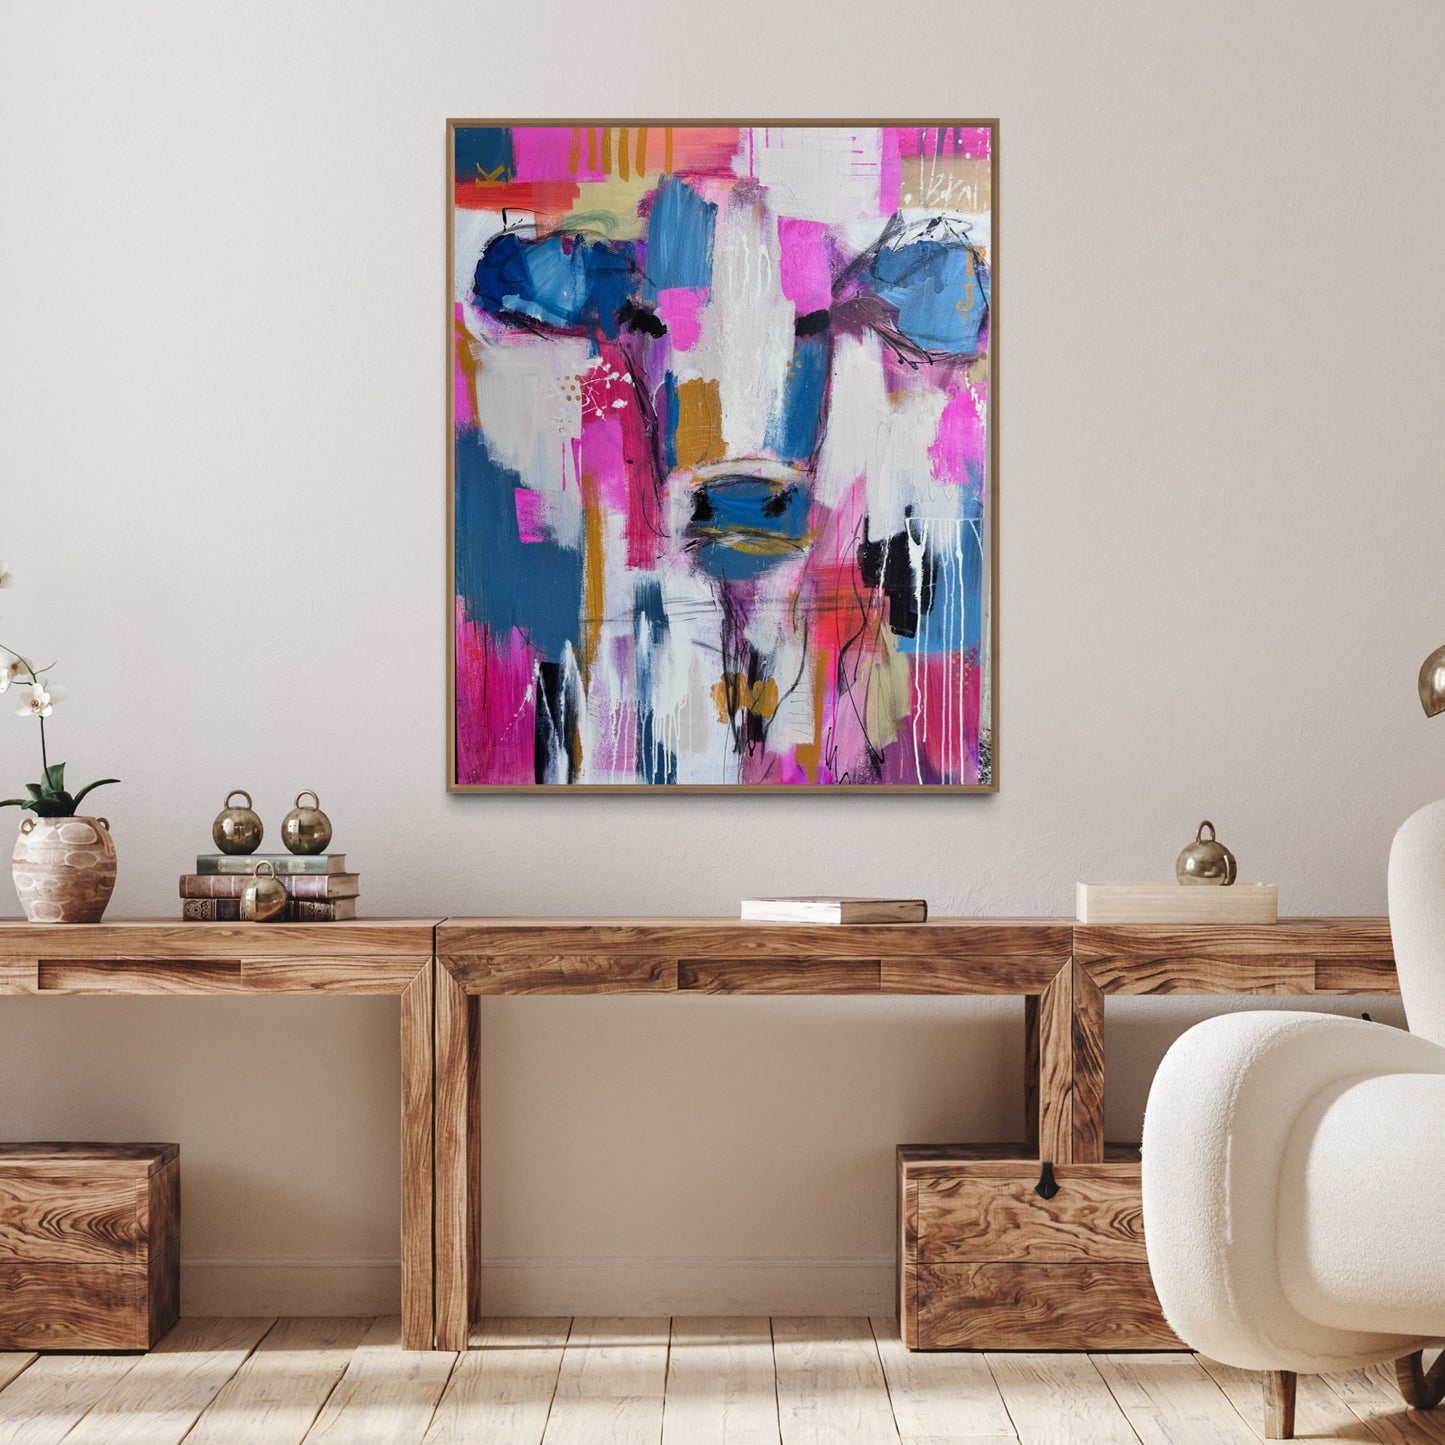 Belle - Abstract Cow by Australian Artist Rose Hewartson Original Abstract Painting on Canvas Framed 96x123 cm Statement Piece